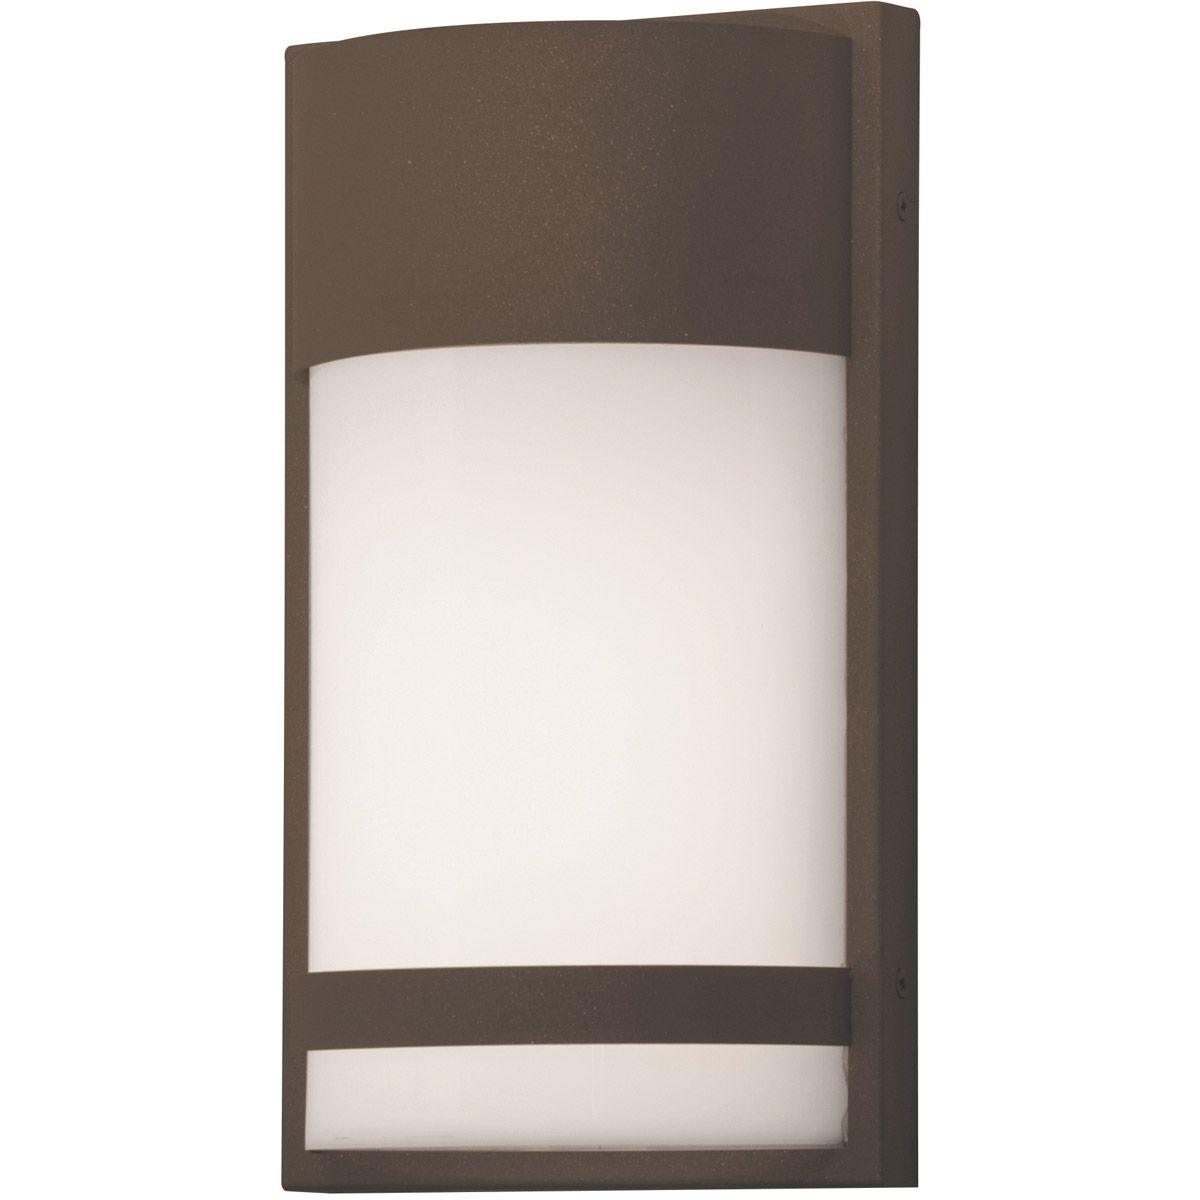 Paxton 12 in. LED Outdoor Wall Sconce